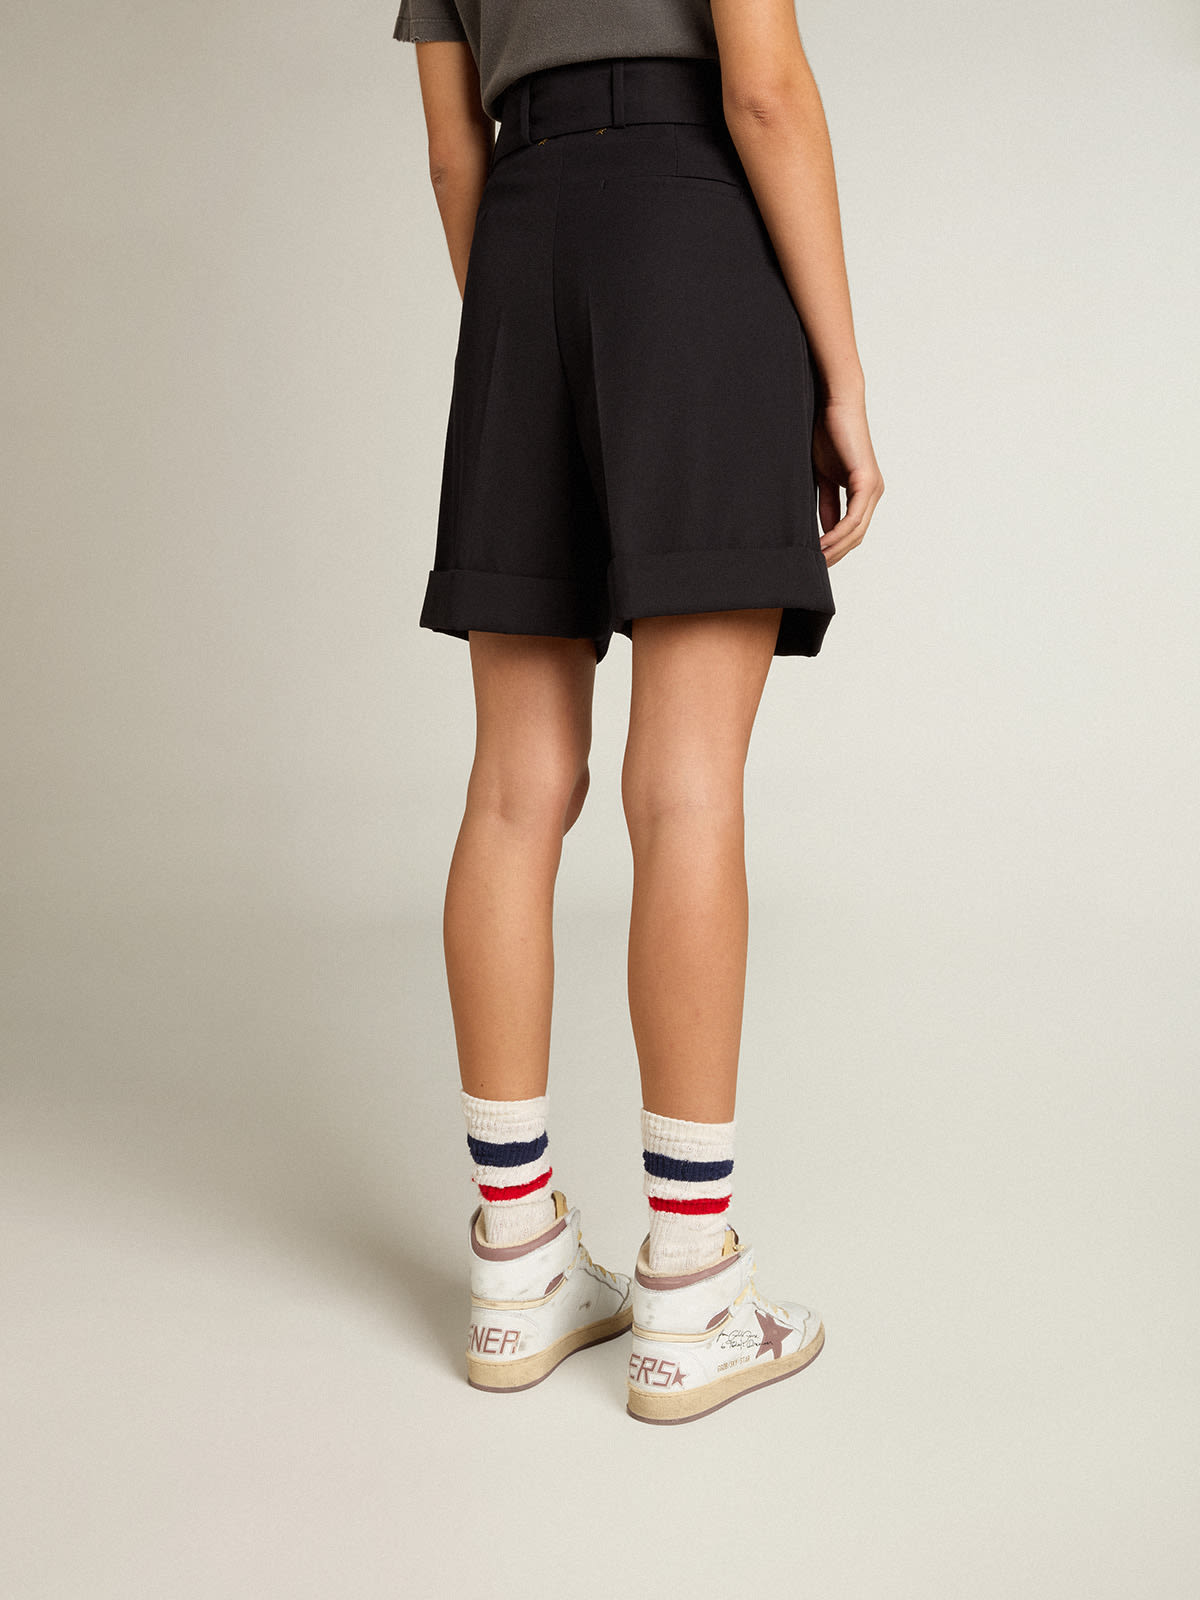 Golden Goose - Golden Collection shorts in black wool gabardine with belt at the waist in 